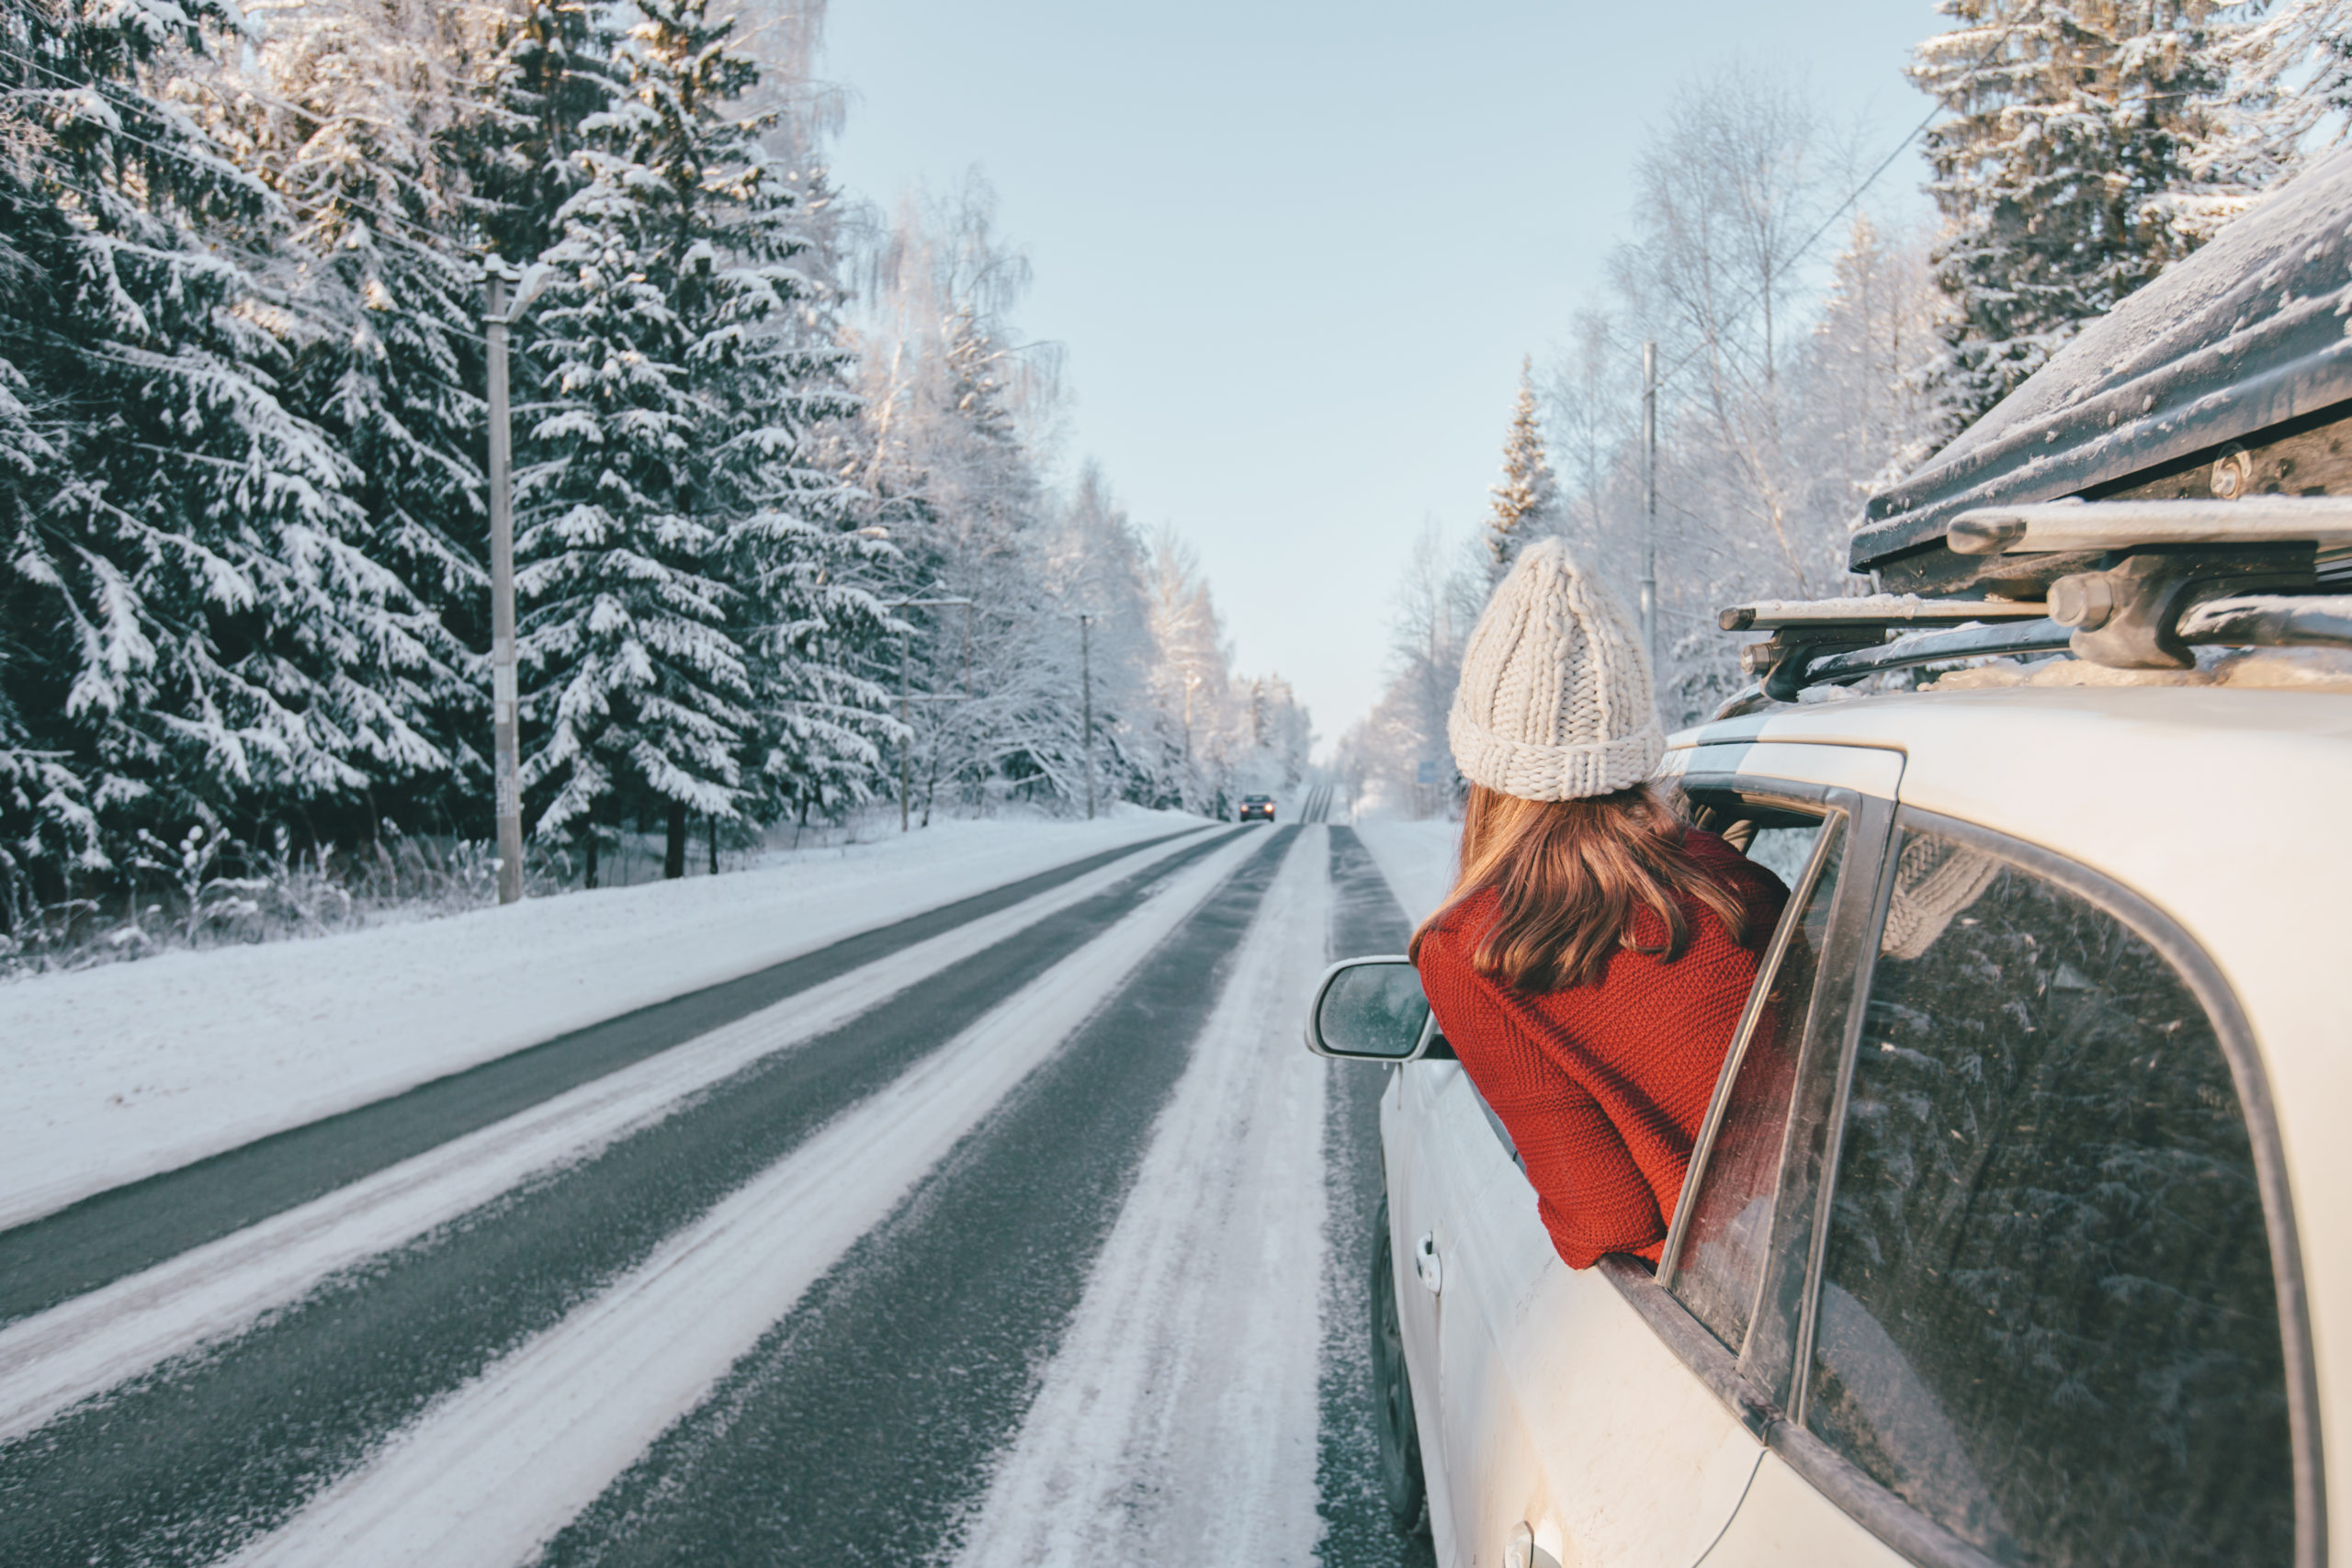 A woman looking out the car window at a scenic winter highway through a forest with snow.